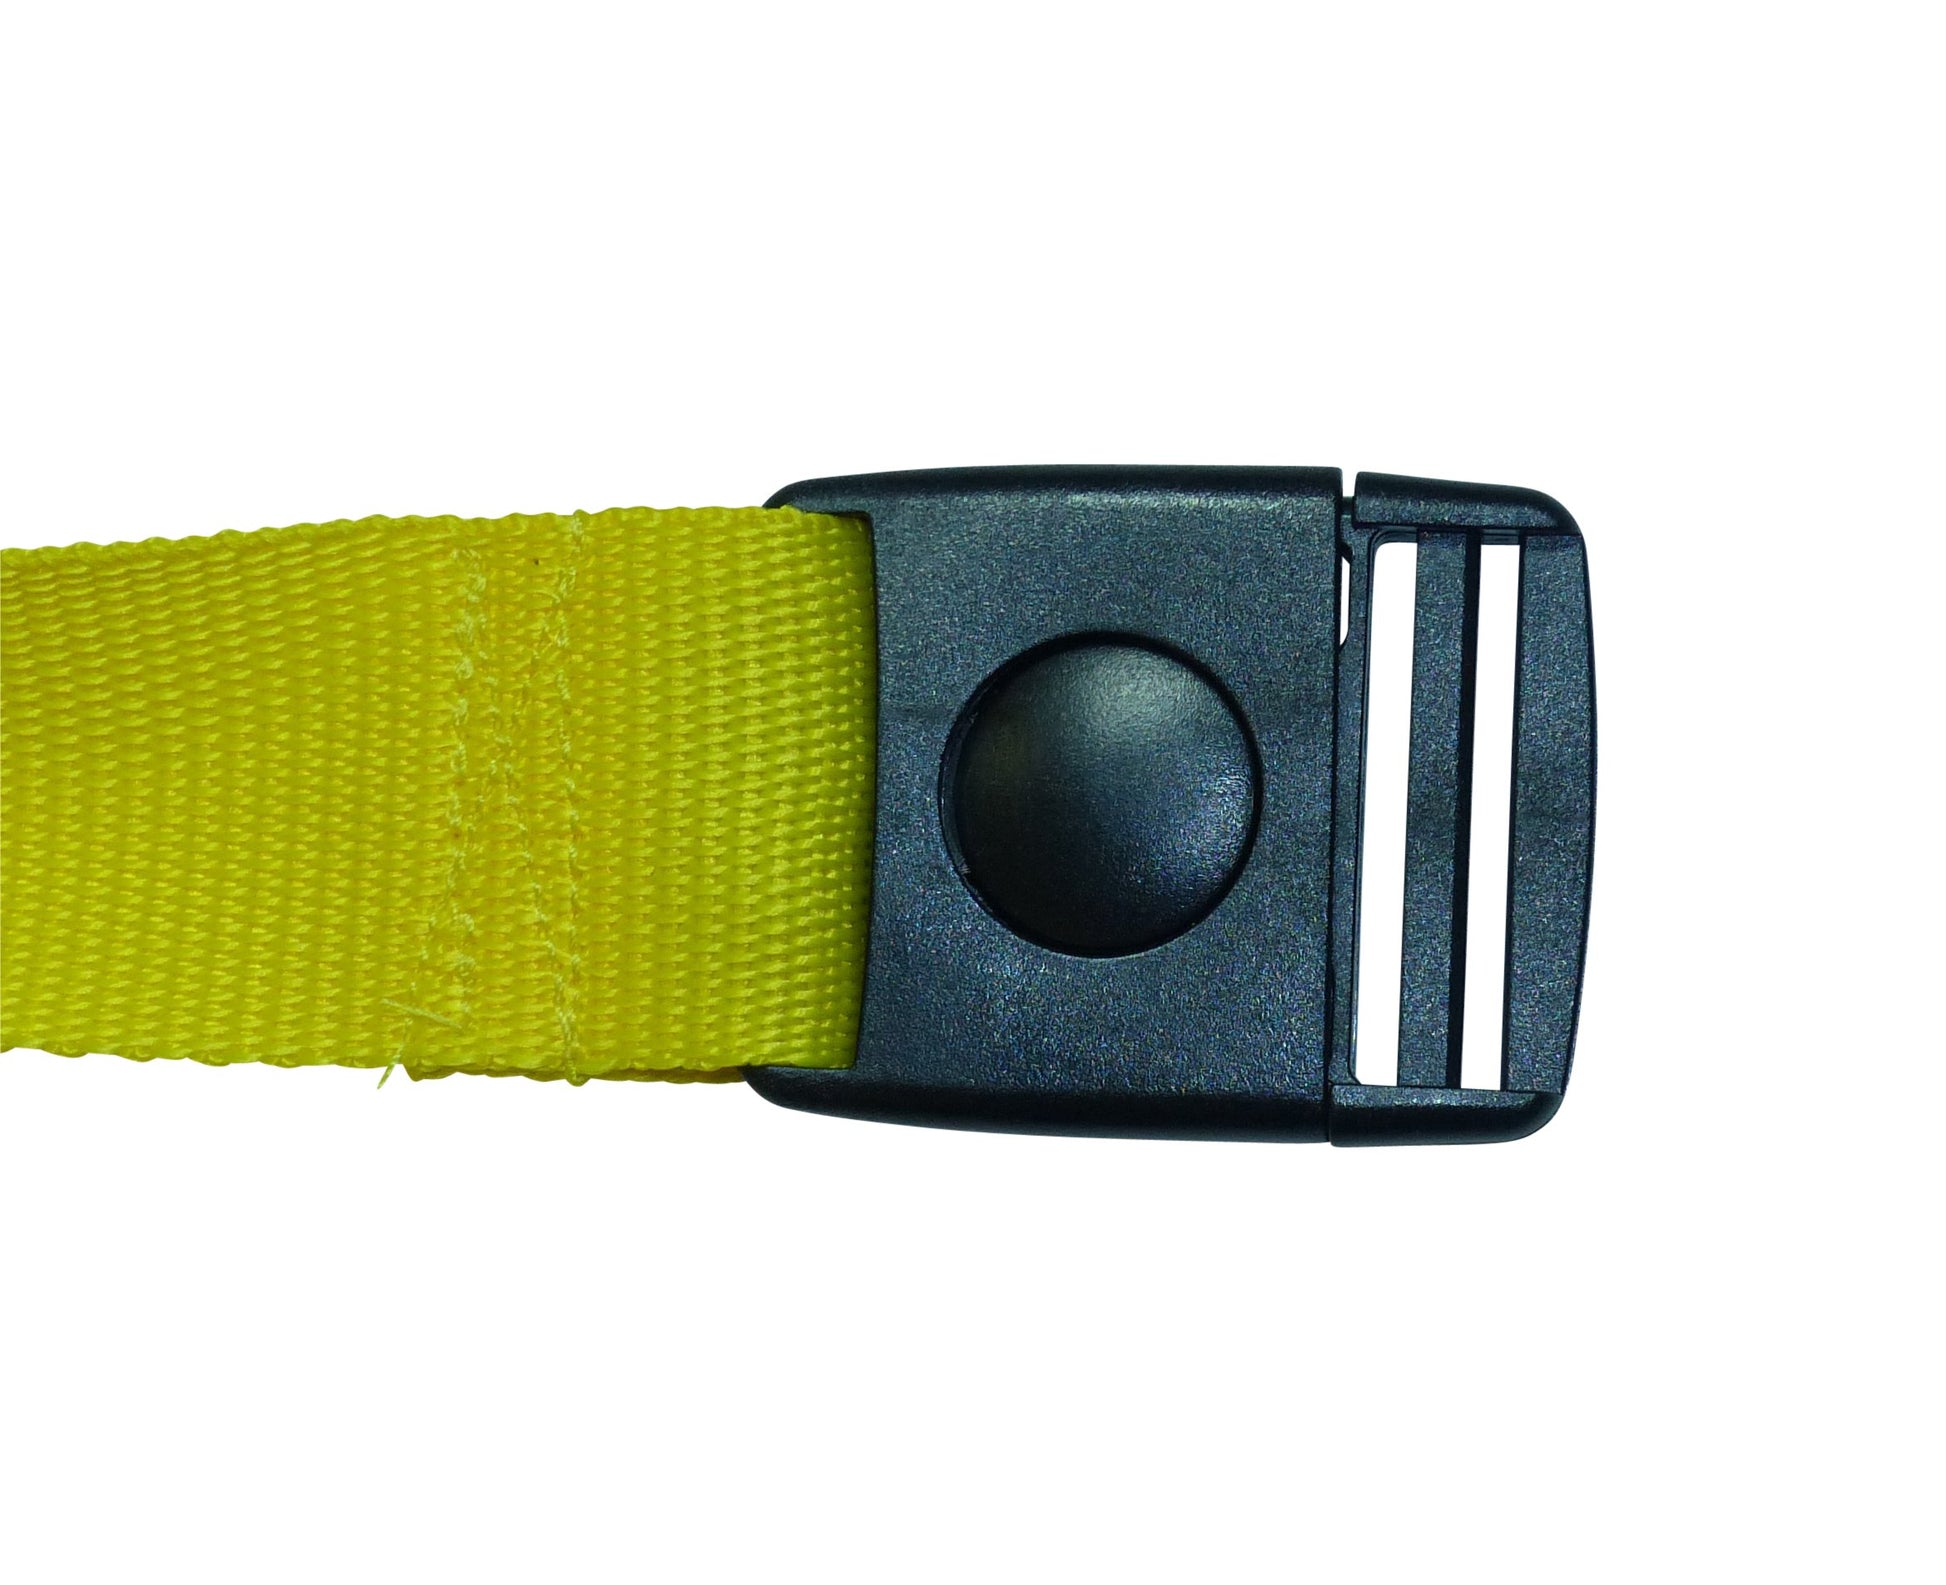 Benristraps 25mm button centre release buckle on webbing